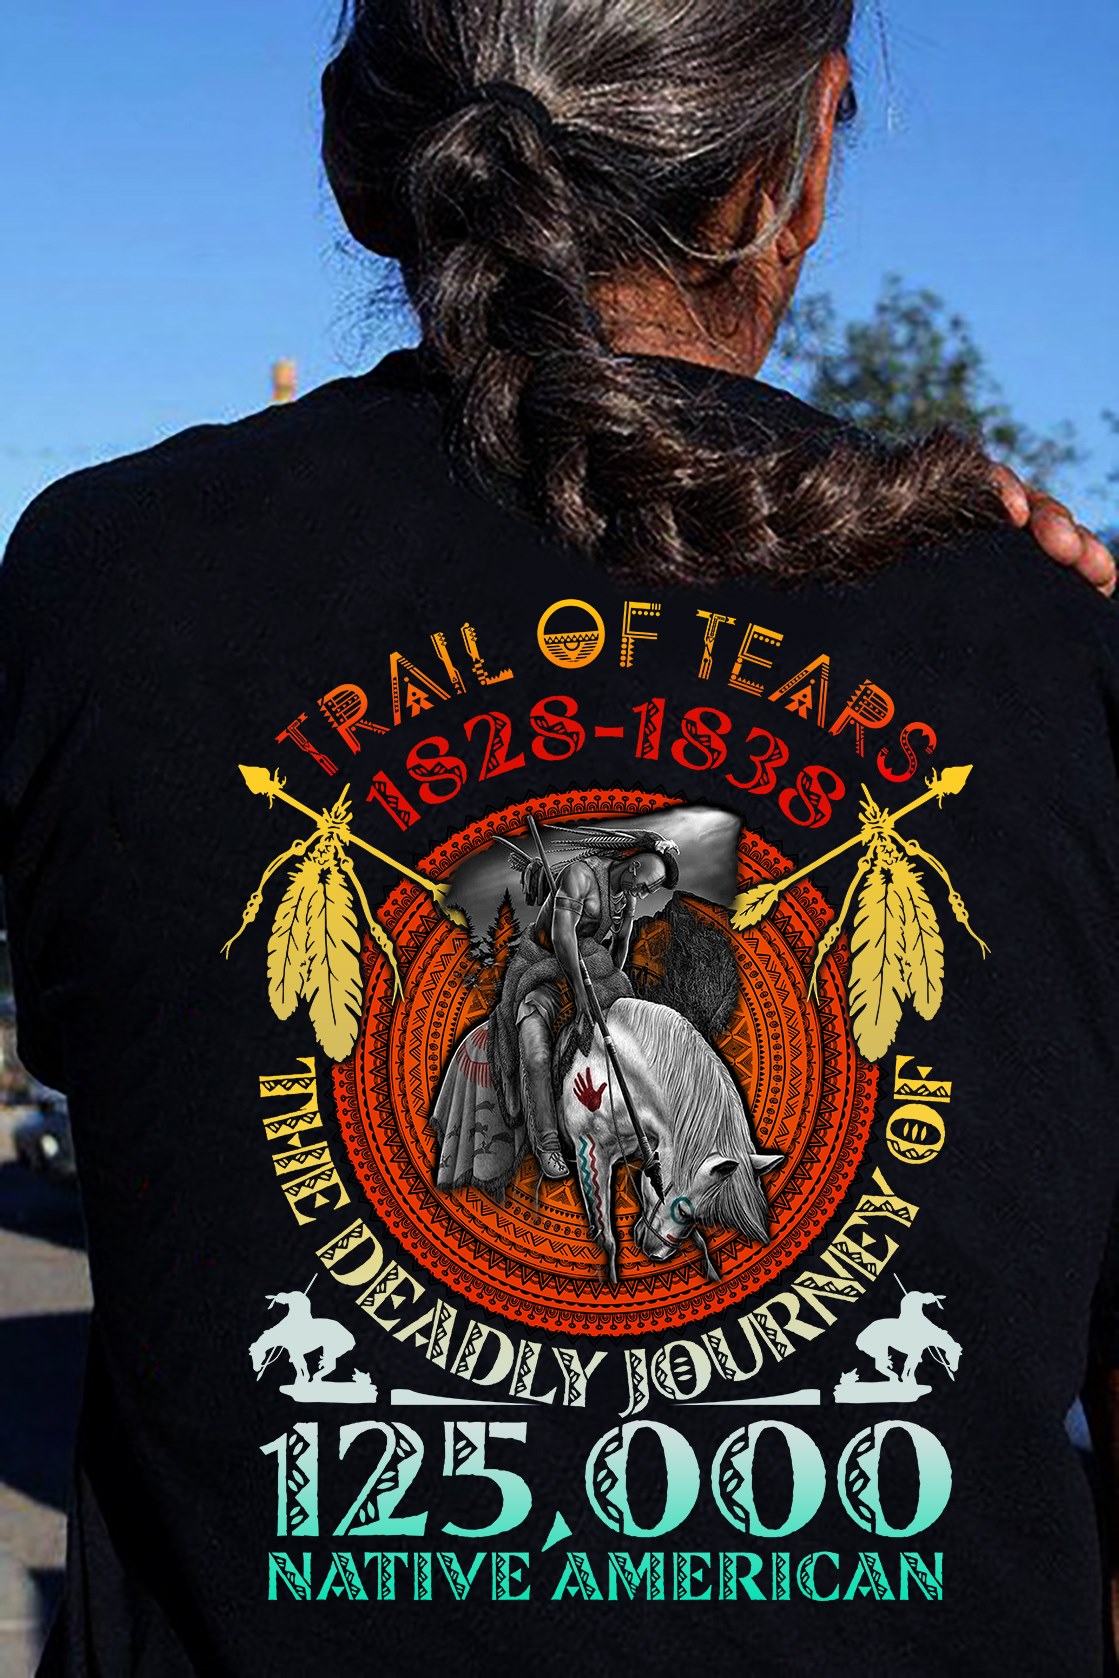 Trail of tears 1828 - 1838 The deadly journey of 125000 Native American